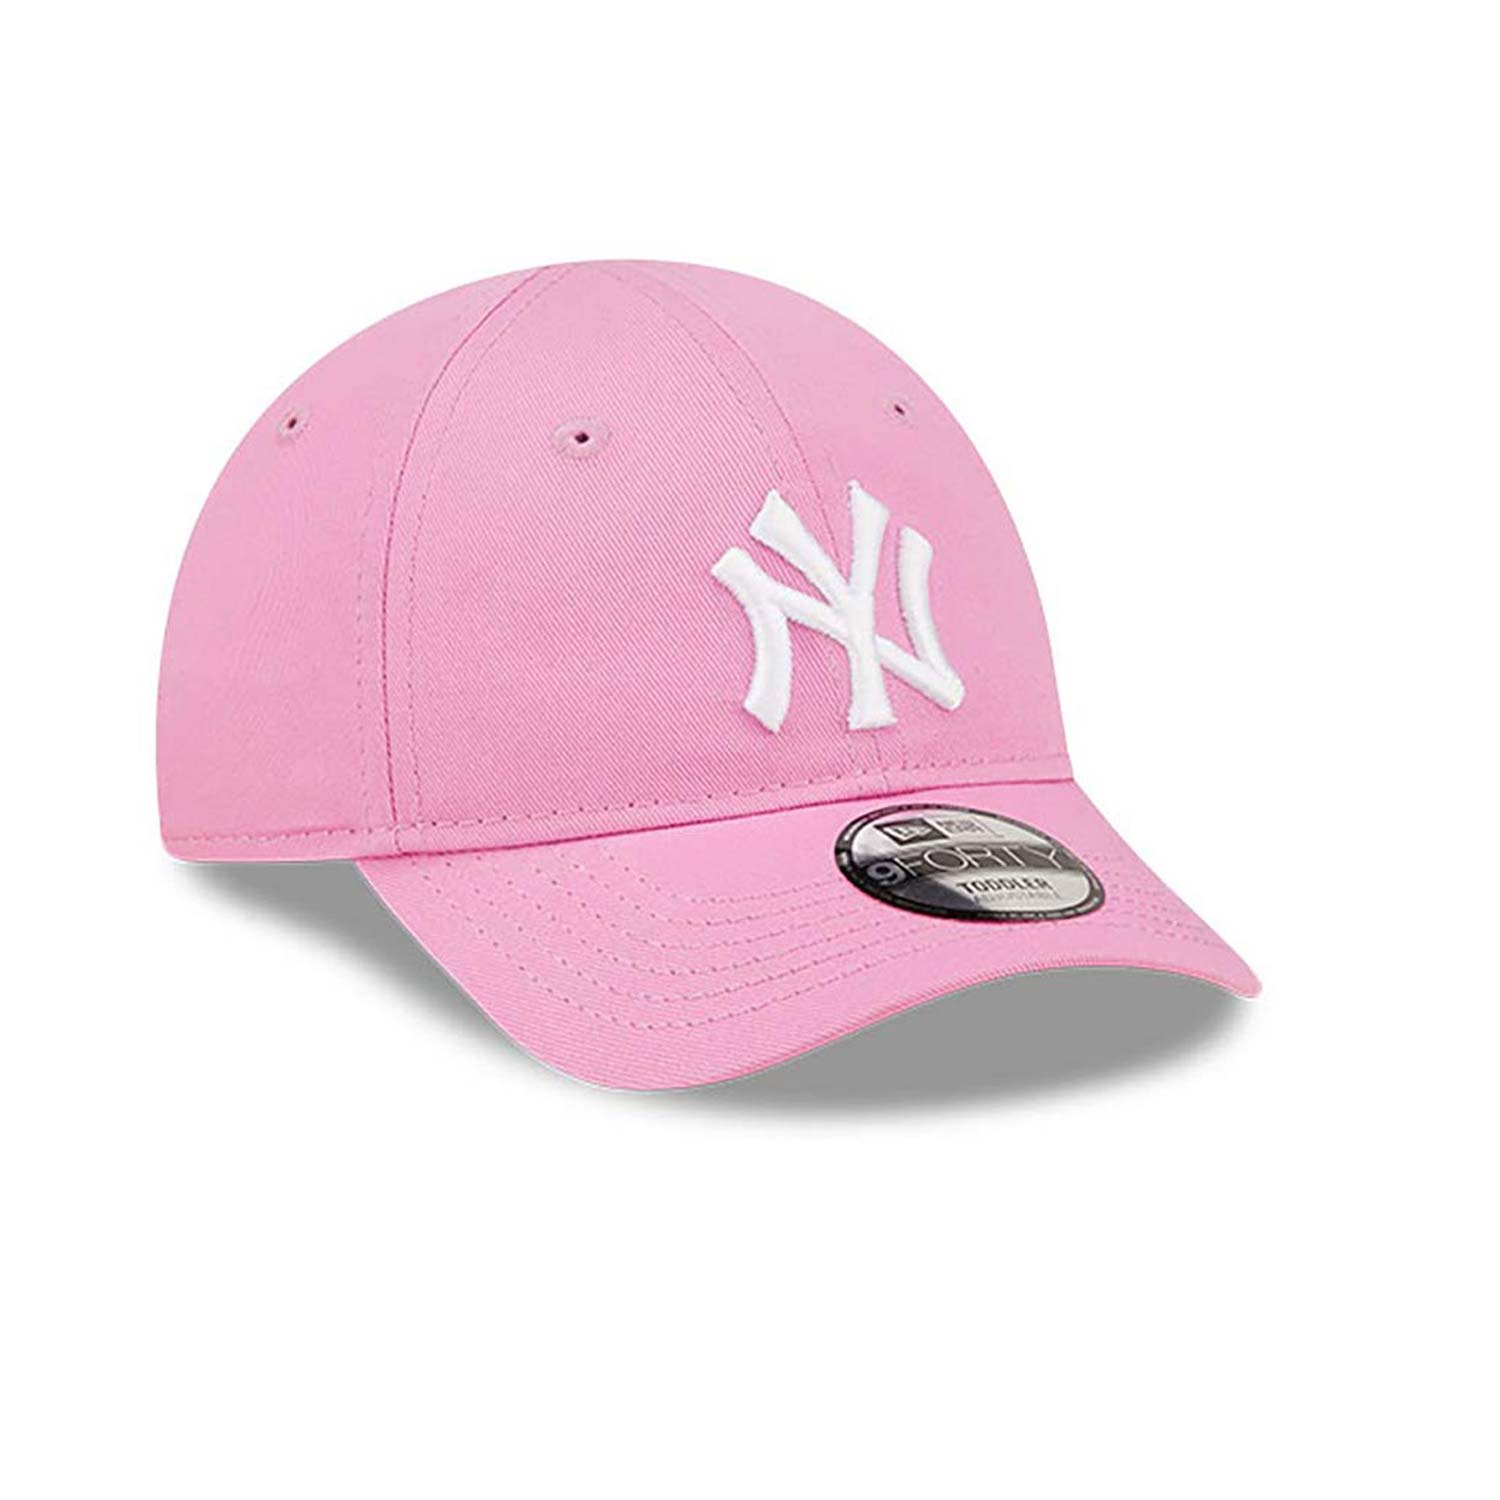 New York Yankees Toddler League Essential Pink 9FORTY Cap